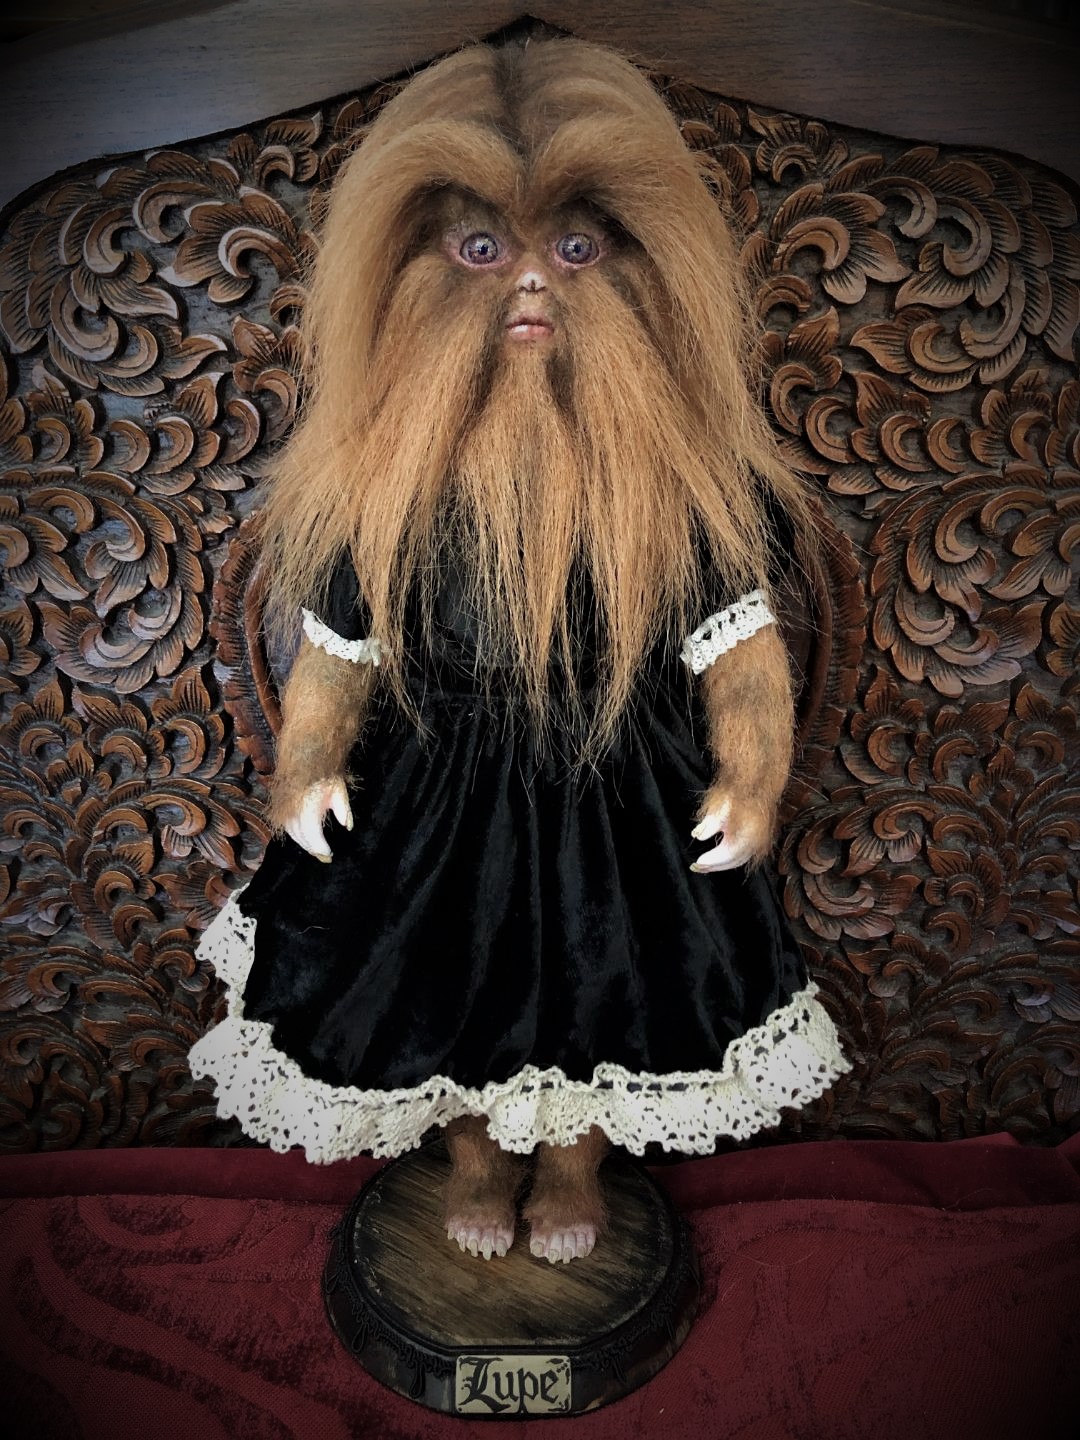 vintage-inspired werewolf artdoll with light brown fur covering her face, arms and legs dressed in black velvet dress trimmed with white lace standing on a wooden platform